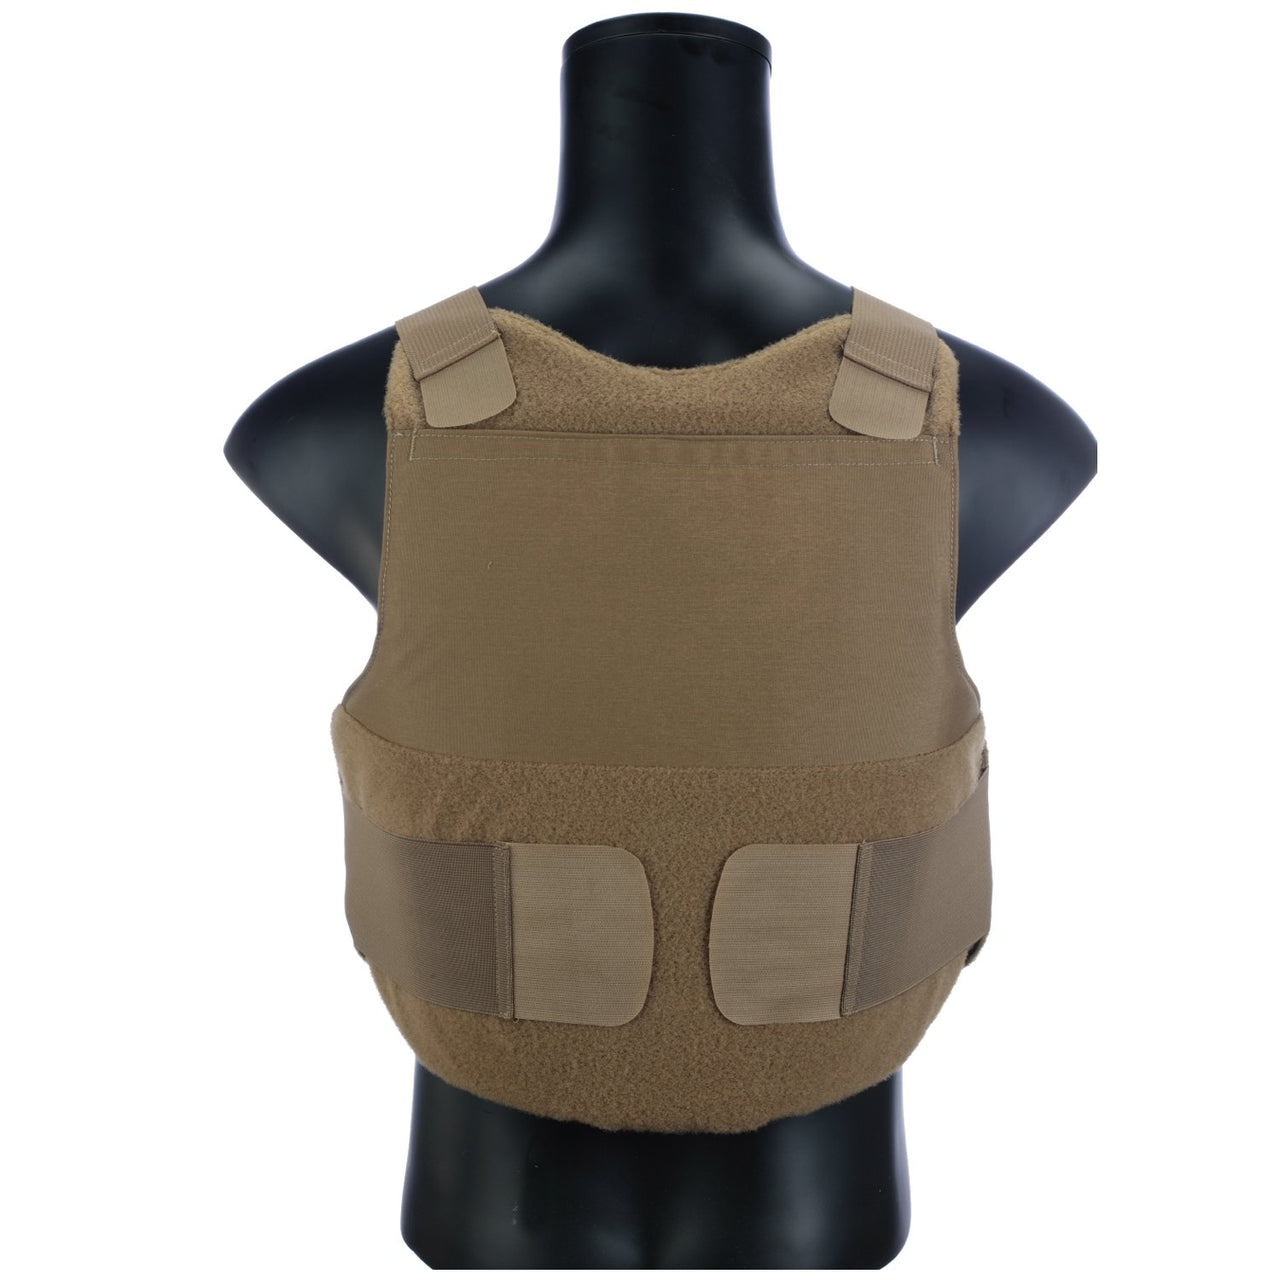 A Body Armor Direct mannequin with a tan plate carrier.